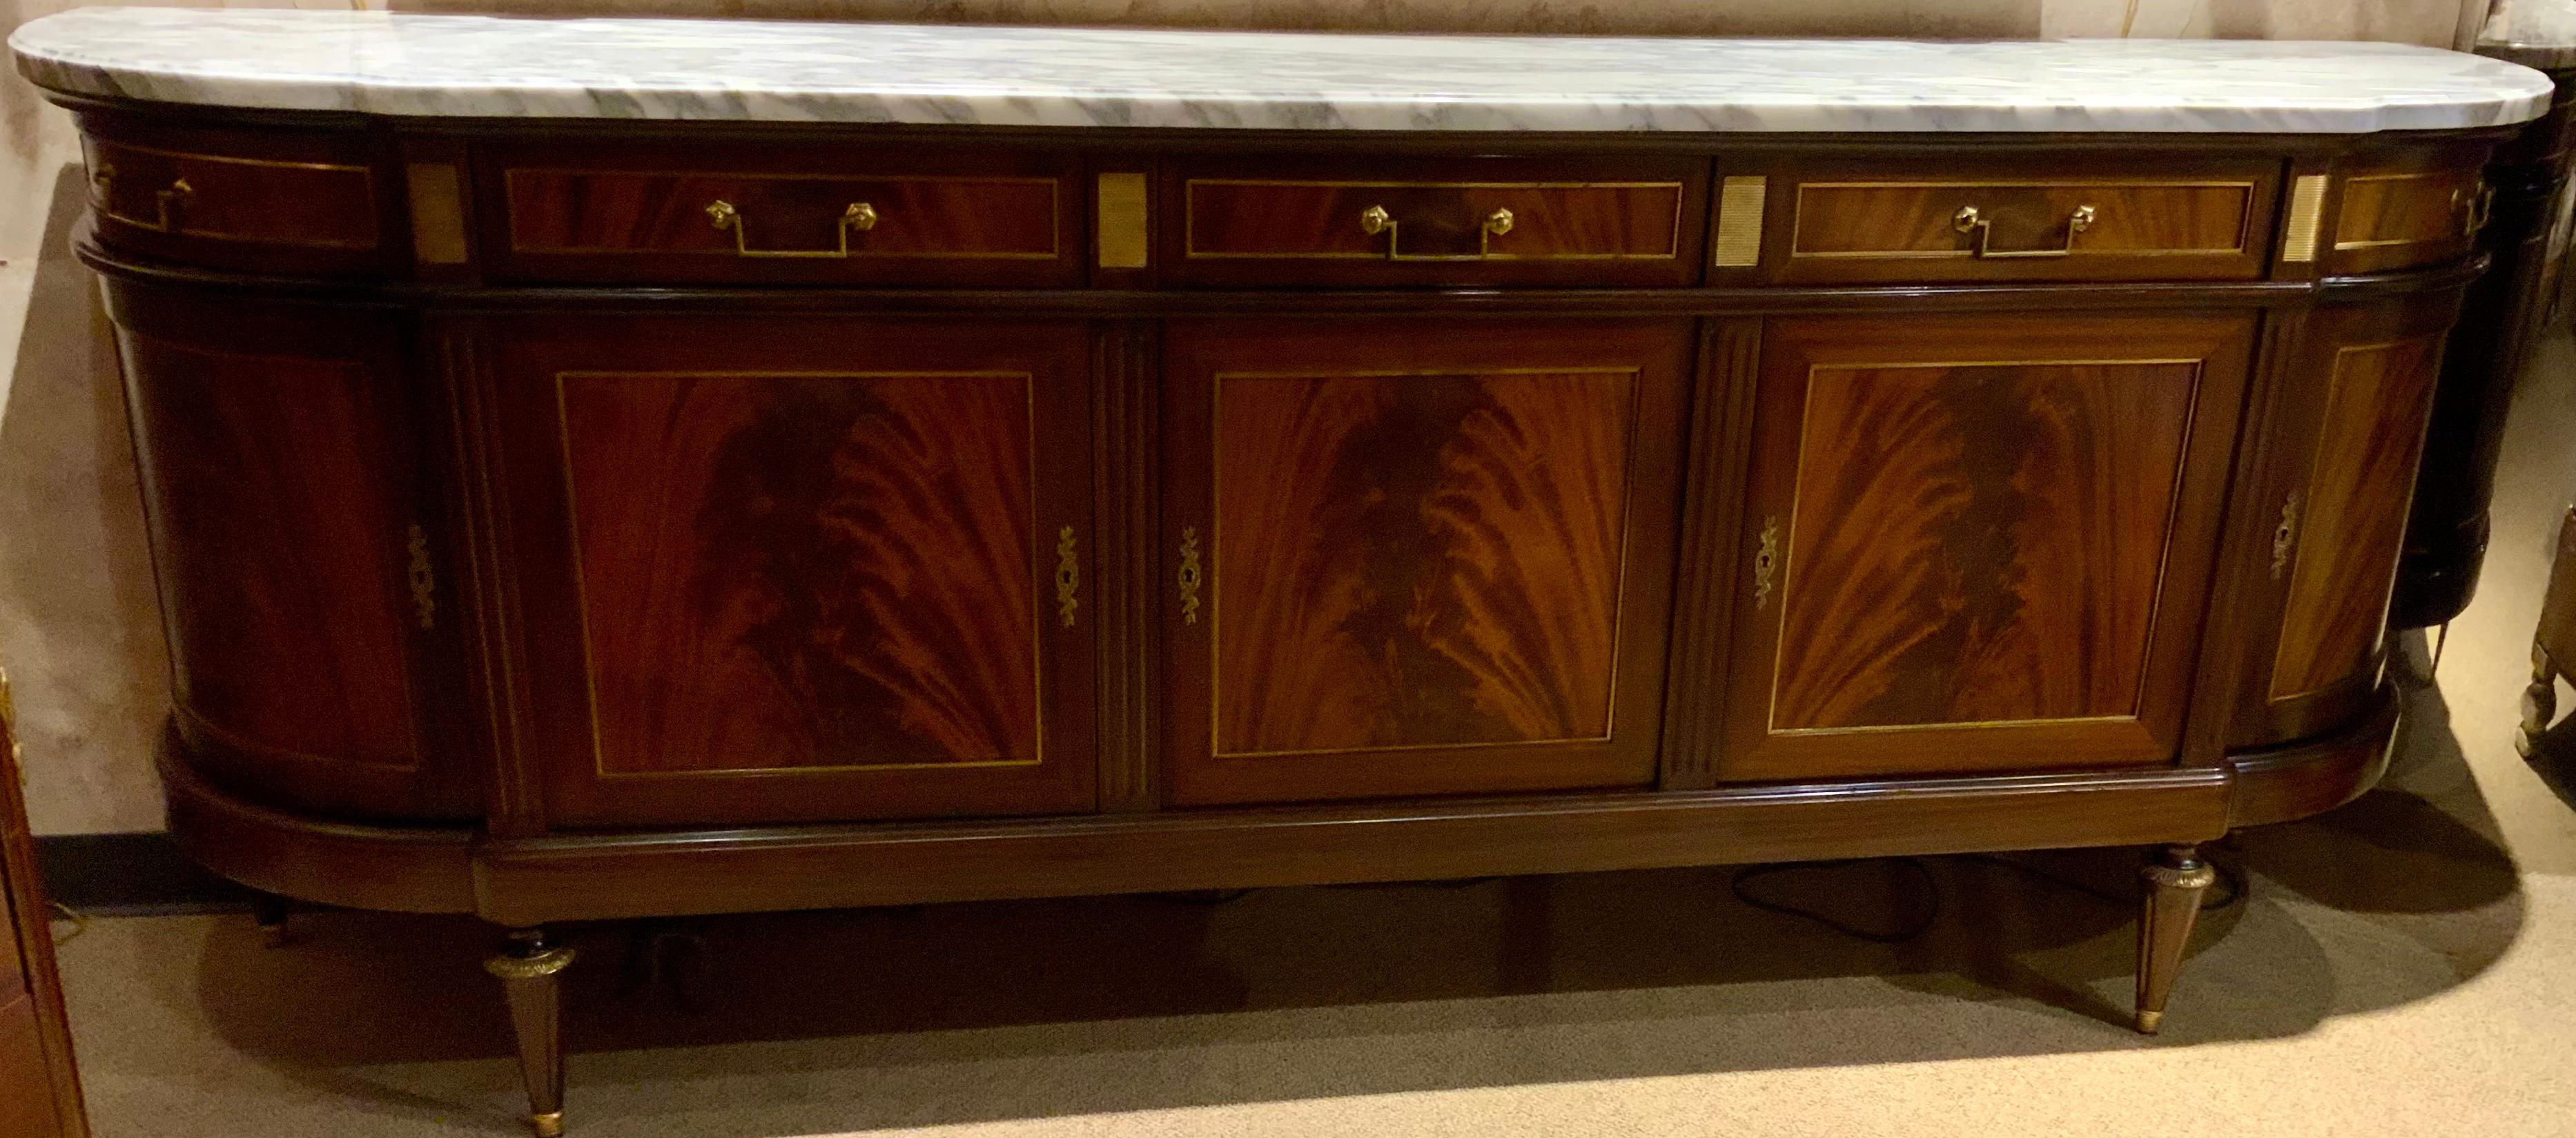 The quality in this piece is superb, made of the finest crotch mahogany 
With exceptional construction. The white marble Top is without any
Problems or stains. It has a light pale Gray vein running throughout.
It has five doors that open freely to